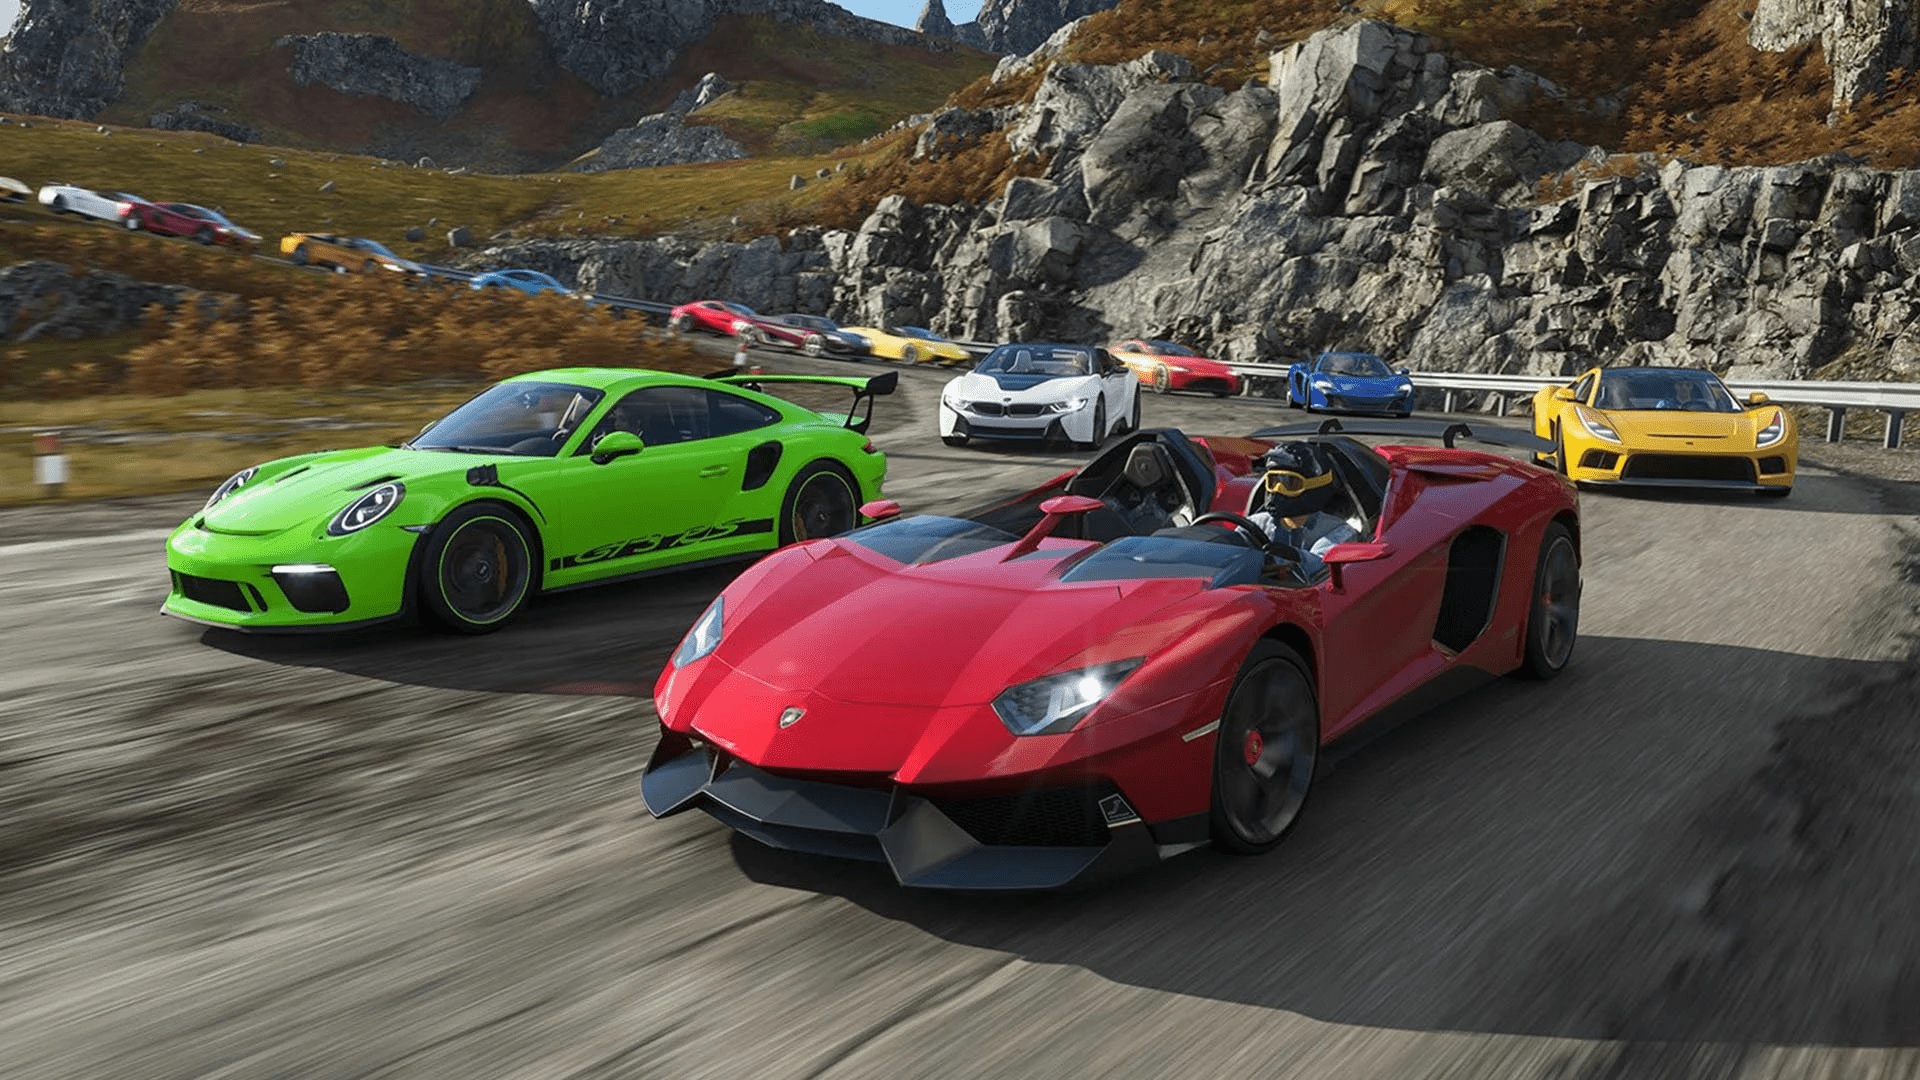 Forza Motorsport 7 PC performance review: a PC port in need of a pit stop